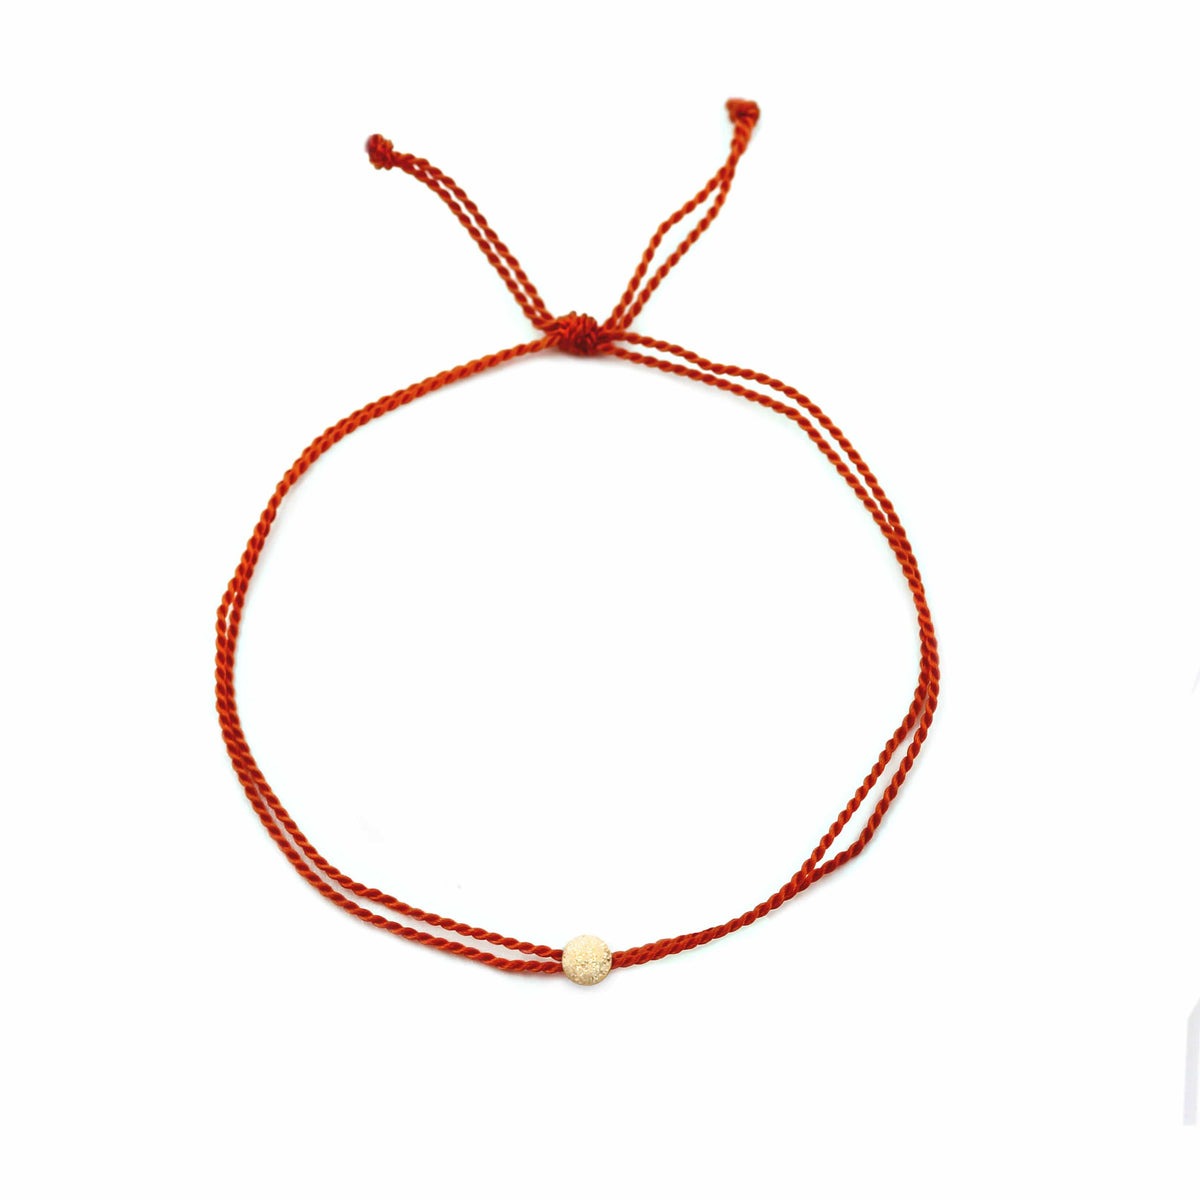 red nylon cord bracelets 14k gold filled bead your friendship is priceless affirmation jewelry